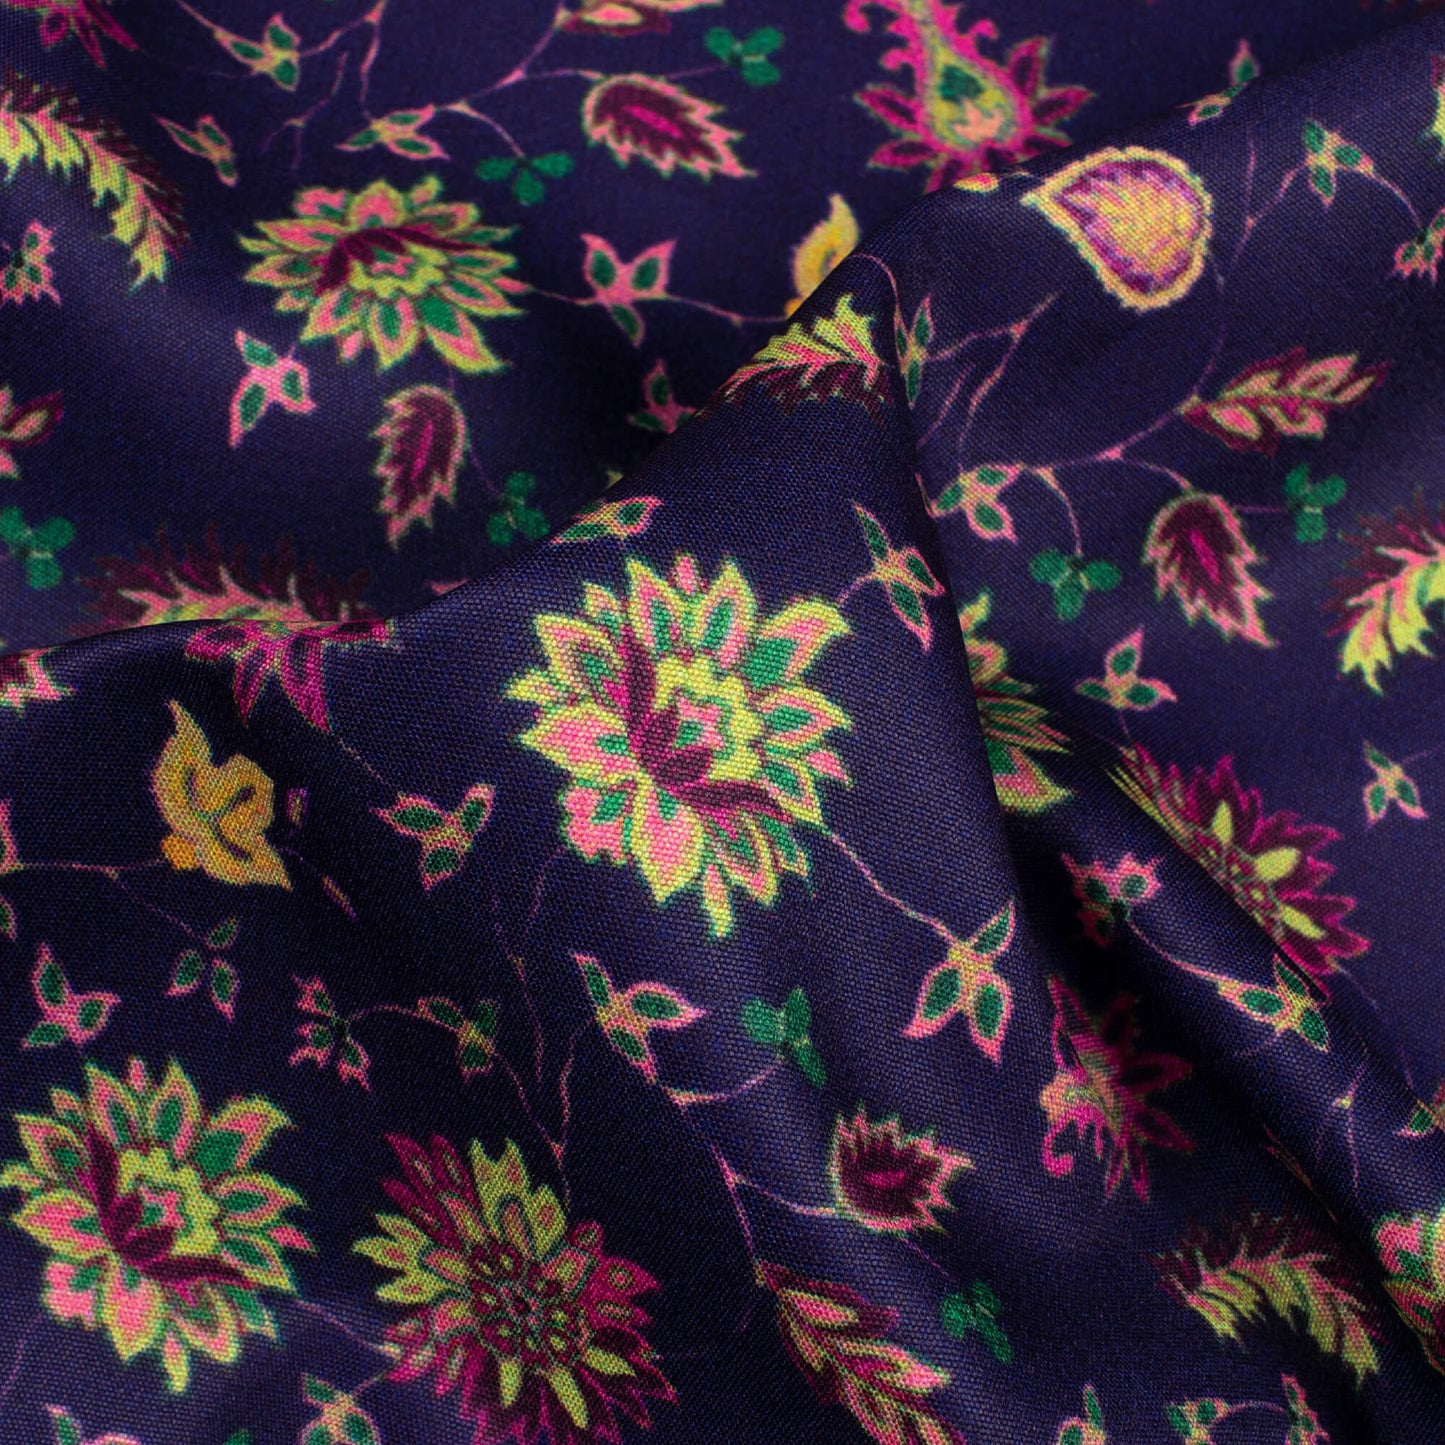 Indigo Blue And Yellow Floral Pattern Digital Print Poly Micro Crepe Fabric